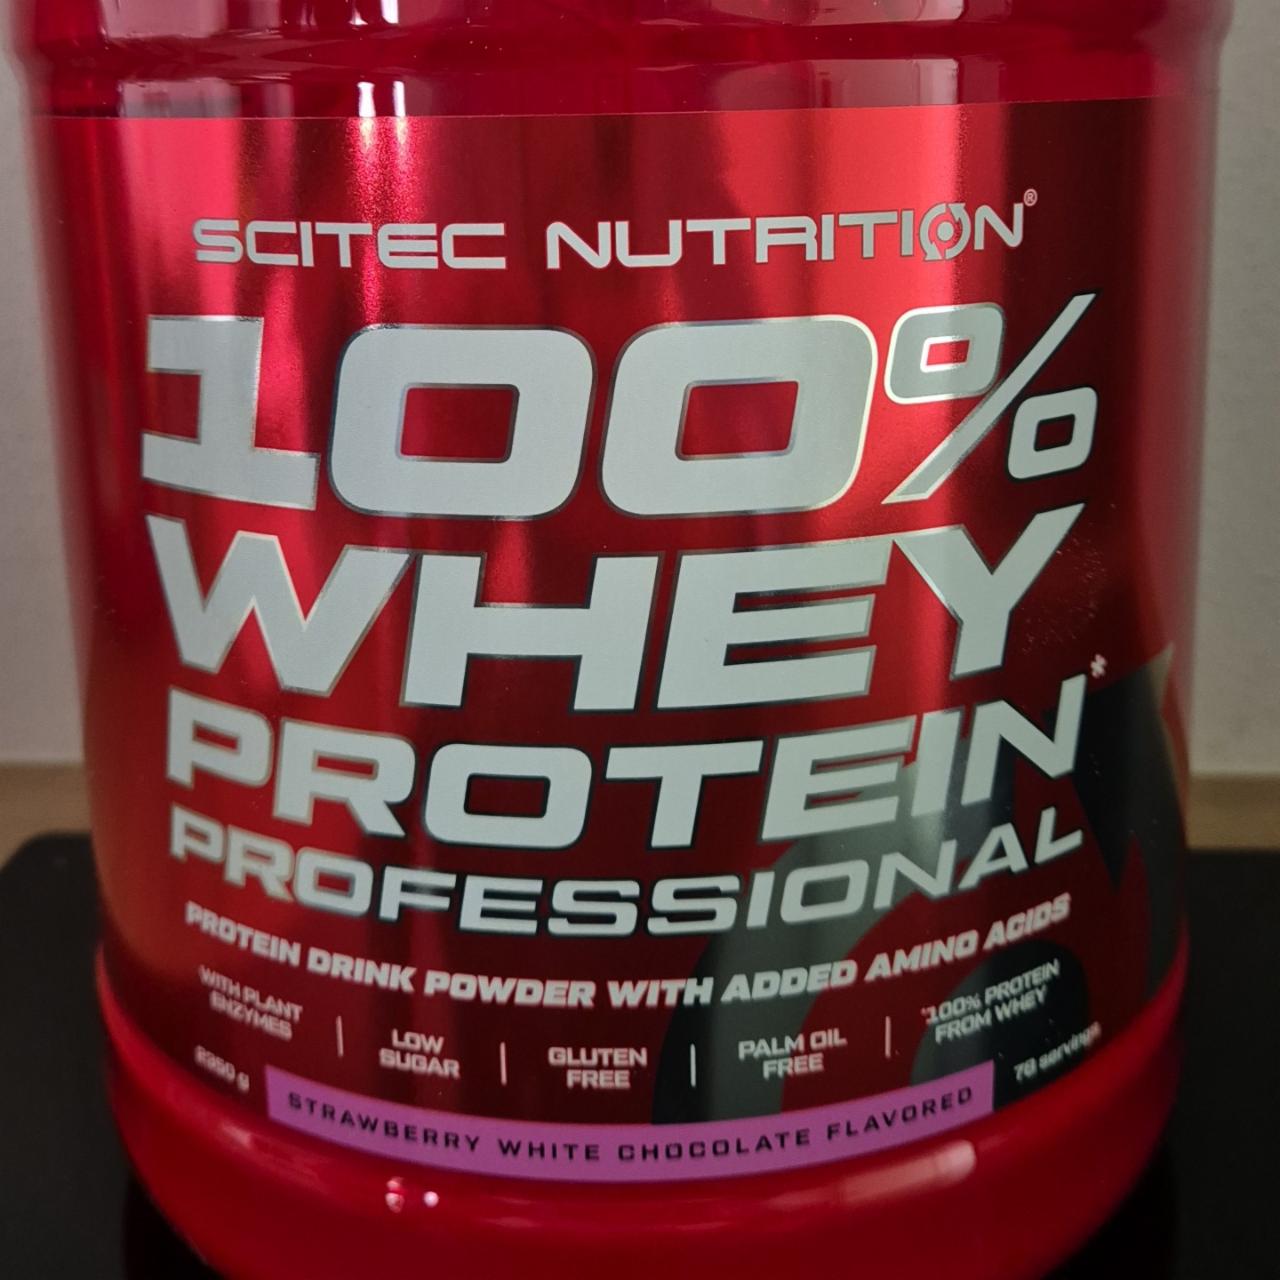 Képek - 100% whey protein professional Strawberry white chocolate flavored Scitec Nutrition